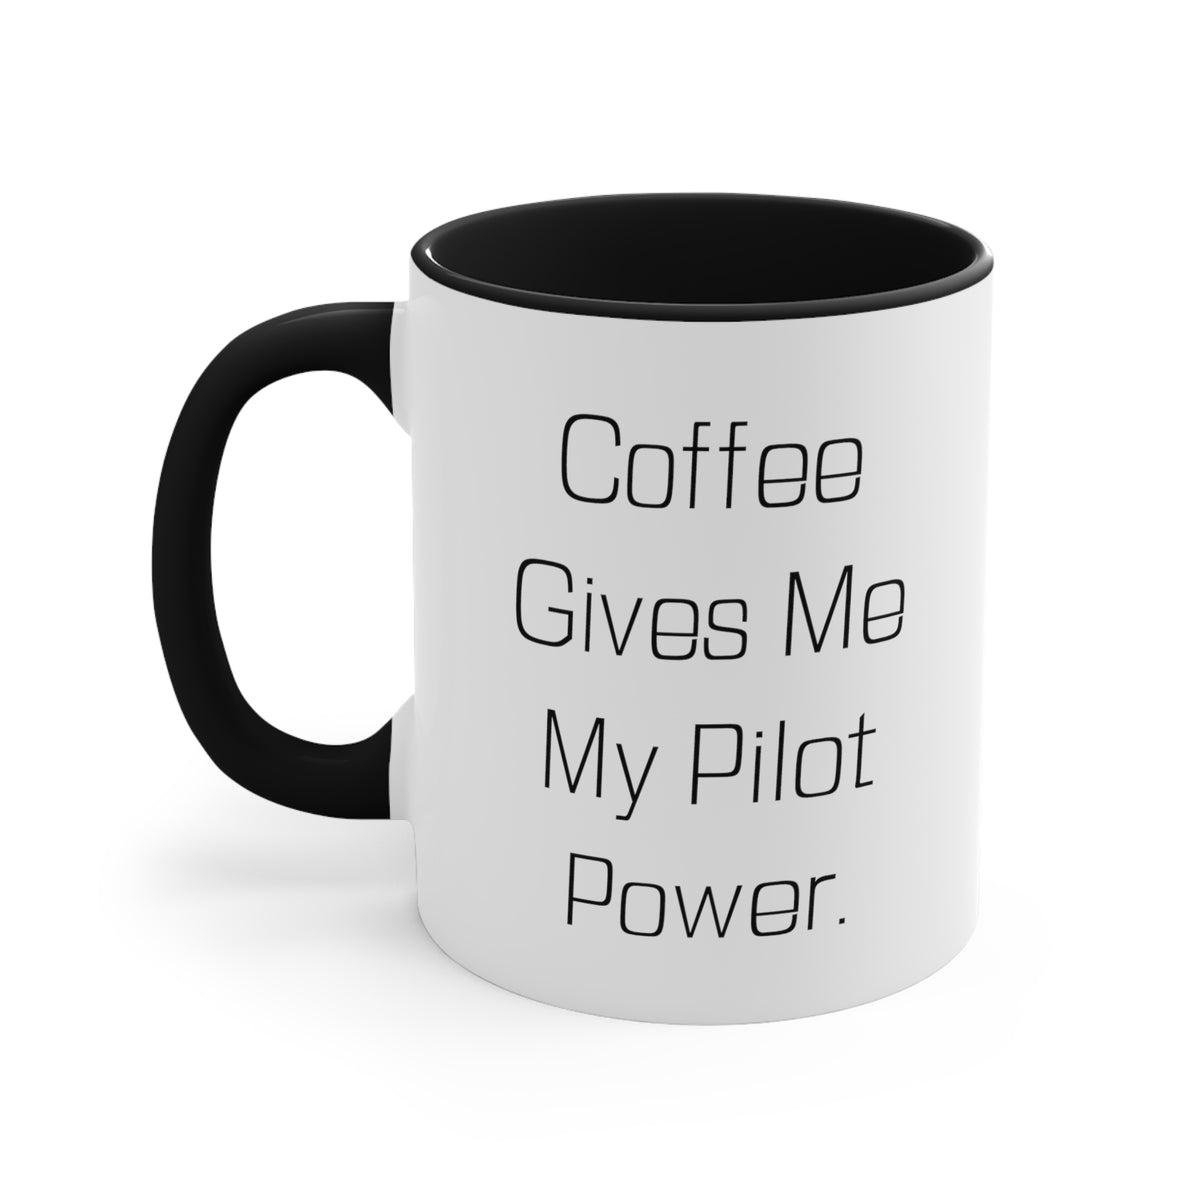 Coffee Gives Me My Pilot Power. Two Tone 11oz Mug, Pilot Cup, Unique Gifts For Pilot from Boss, Pilot two tone 11oz mug gift set, Pilot two tone 11oz mug gift ideas, Pilot two tone 11oz mug gift wrap